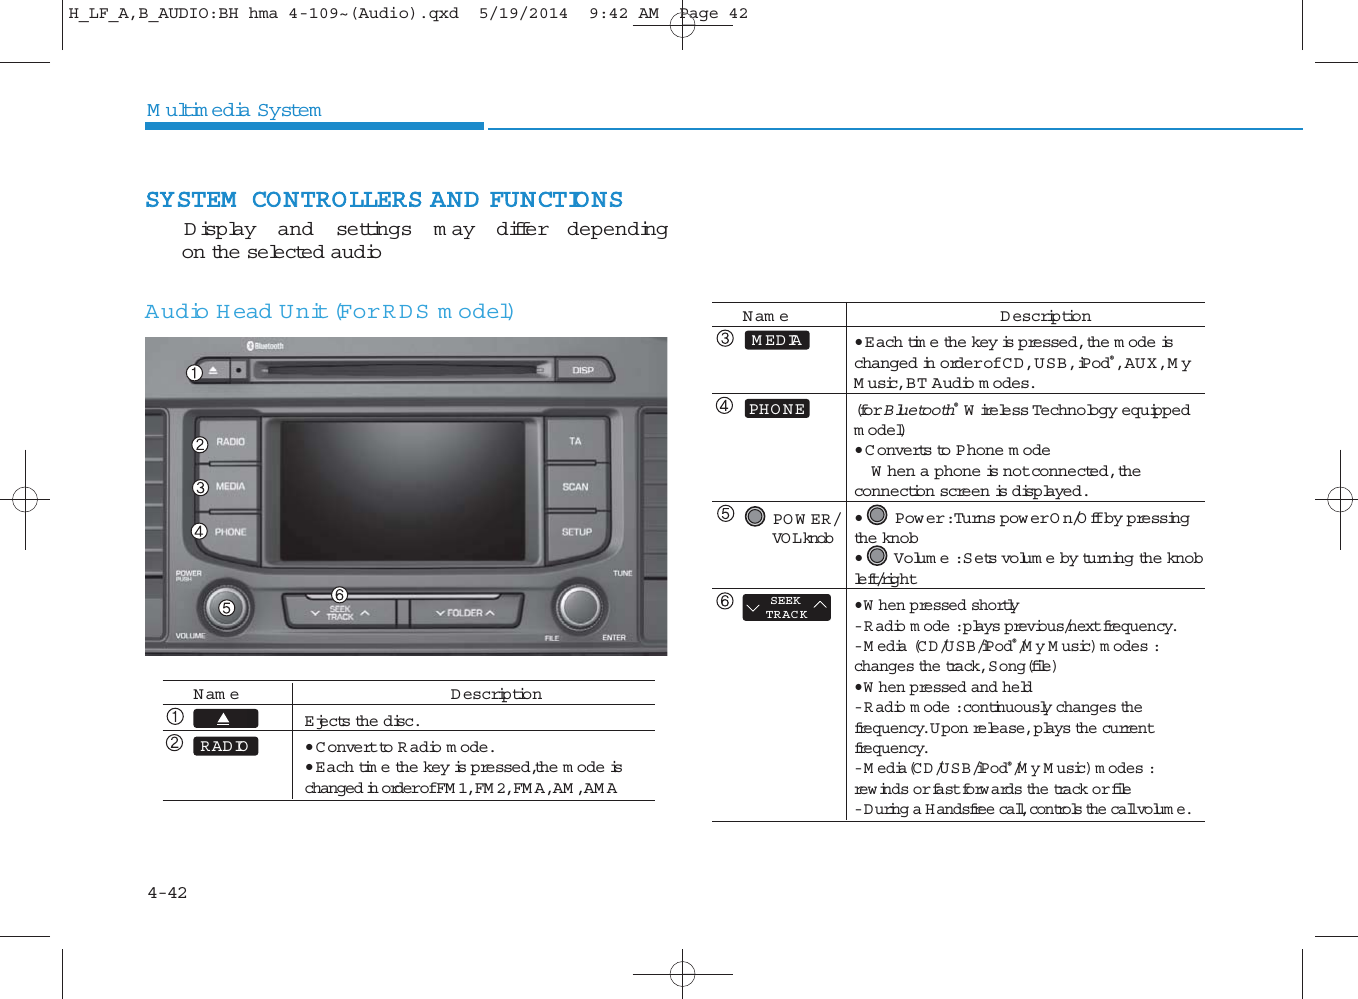 4-42Multimedia SystemSYSTEM  CONTROLLERS AND FUNCTIONSDisplay and settings m ay differ depending on the selected audioAudio H ead Unit (For RDS m odel)N am e D escriptionEjects the disc.• Convert to R adio m ode.• Each time the key is pressed,the m ode is changed in order of FM 1, FM 2, FM A, AM , AM ARADION am e D escription• Each time the key is pressed, the m ode is changed in order of CD, USB, iPod®, AUX, My Music, BT Audio m odes.(for Bluetooth®Wireless Technology equippedm odel)• Converts to Phone m odeW hen a phone is not connected, the connection screen is displayed.• Power : Turns pow er On/Off by pressing the knob• Volum e : Sets volum e by turning the knobleft/right• W hen pressed shortly - R adio m ode : plays previous/next frequency.- M edia (CD/USB/iPod®/My Music) m odes : changes the track, Song(file)• W hen pressed and held- R adio m ode : continuously changes thefrequency. U pon release, plays the current frequency.- M edia(CD/USB/iPod®/My Music) m odes : rew inds or fast forwards the track or file- During a H andsfree call, controls the call volum e.POW ER/ VO L knobSEEKTRACKMEDIAPHO NEH_LF_A,B_AUDIO:BH hma 4-109~(Audio).qxd  5/19/2014  9:42 AM  Page 42